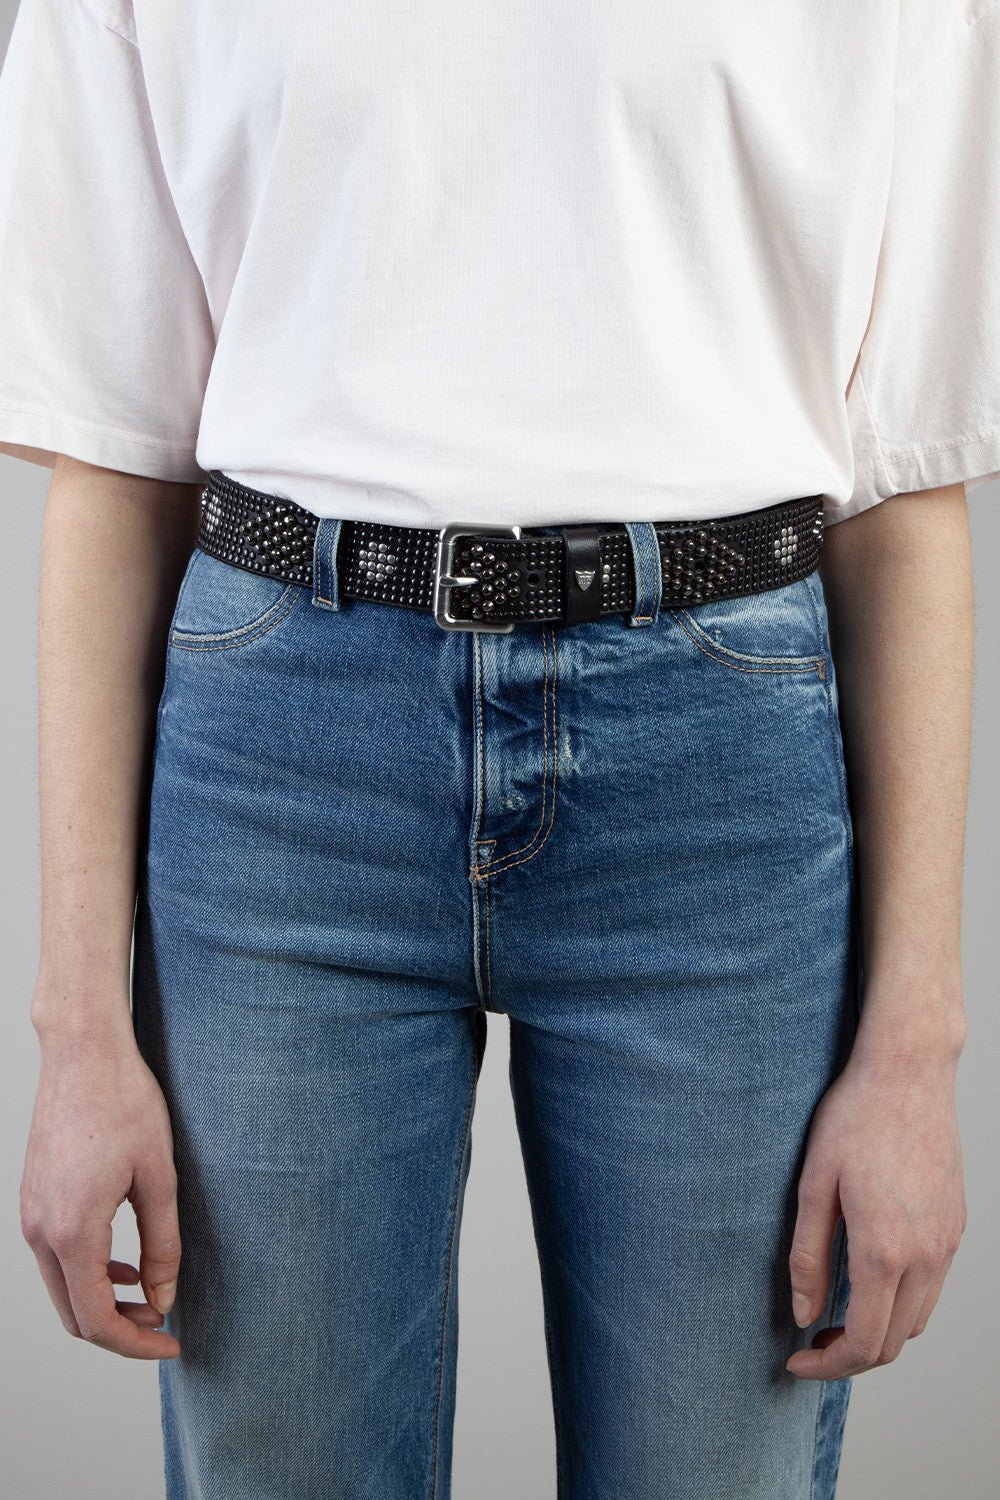 TORY BELT Black leather belt with mixed studs .Height: 3 cm. Made in Italy. HTC LOS ANGELES